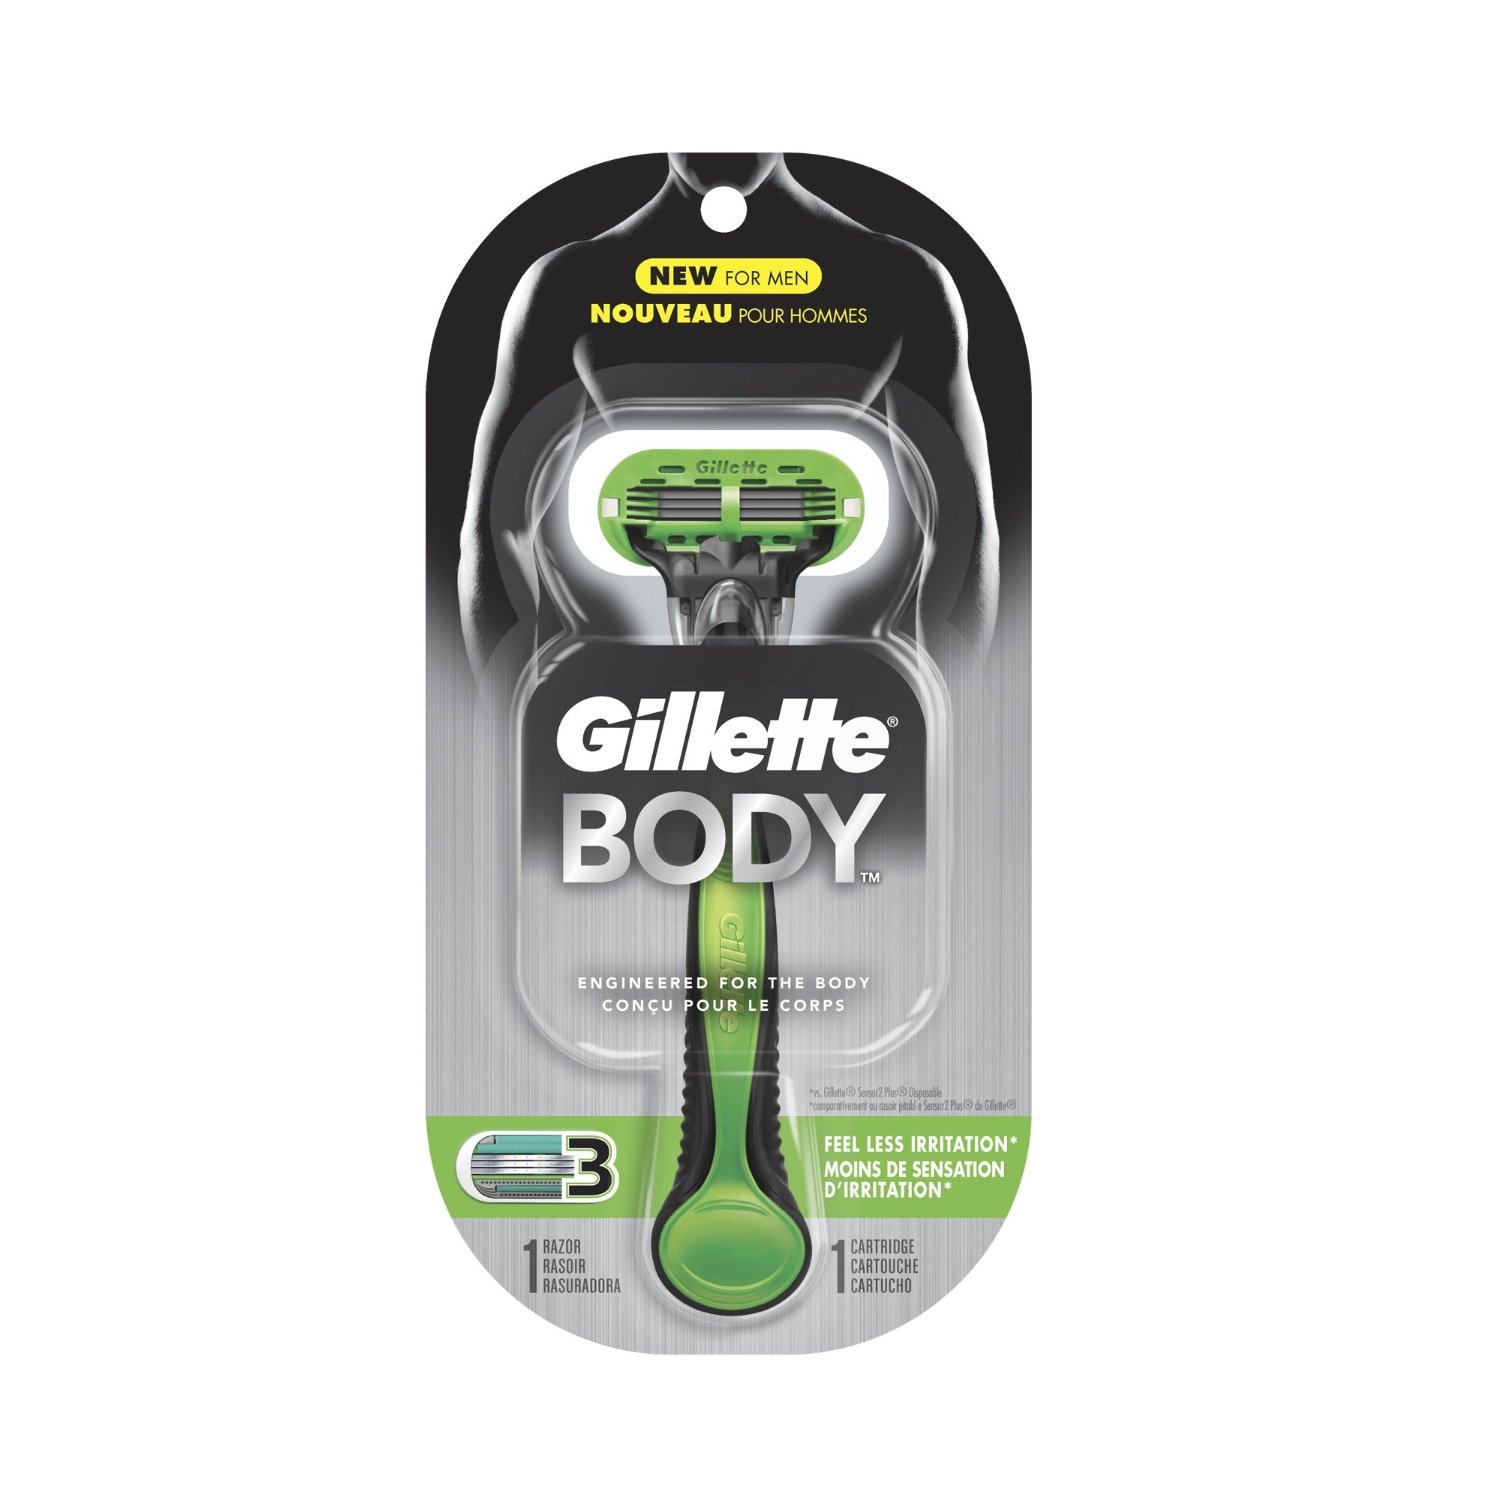 Gillette Body Razor Photos Image And Wallpaper Mouthshut